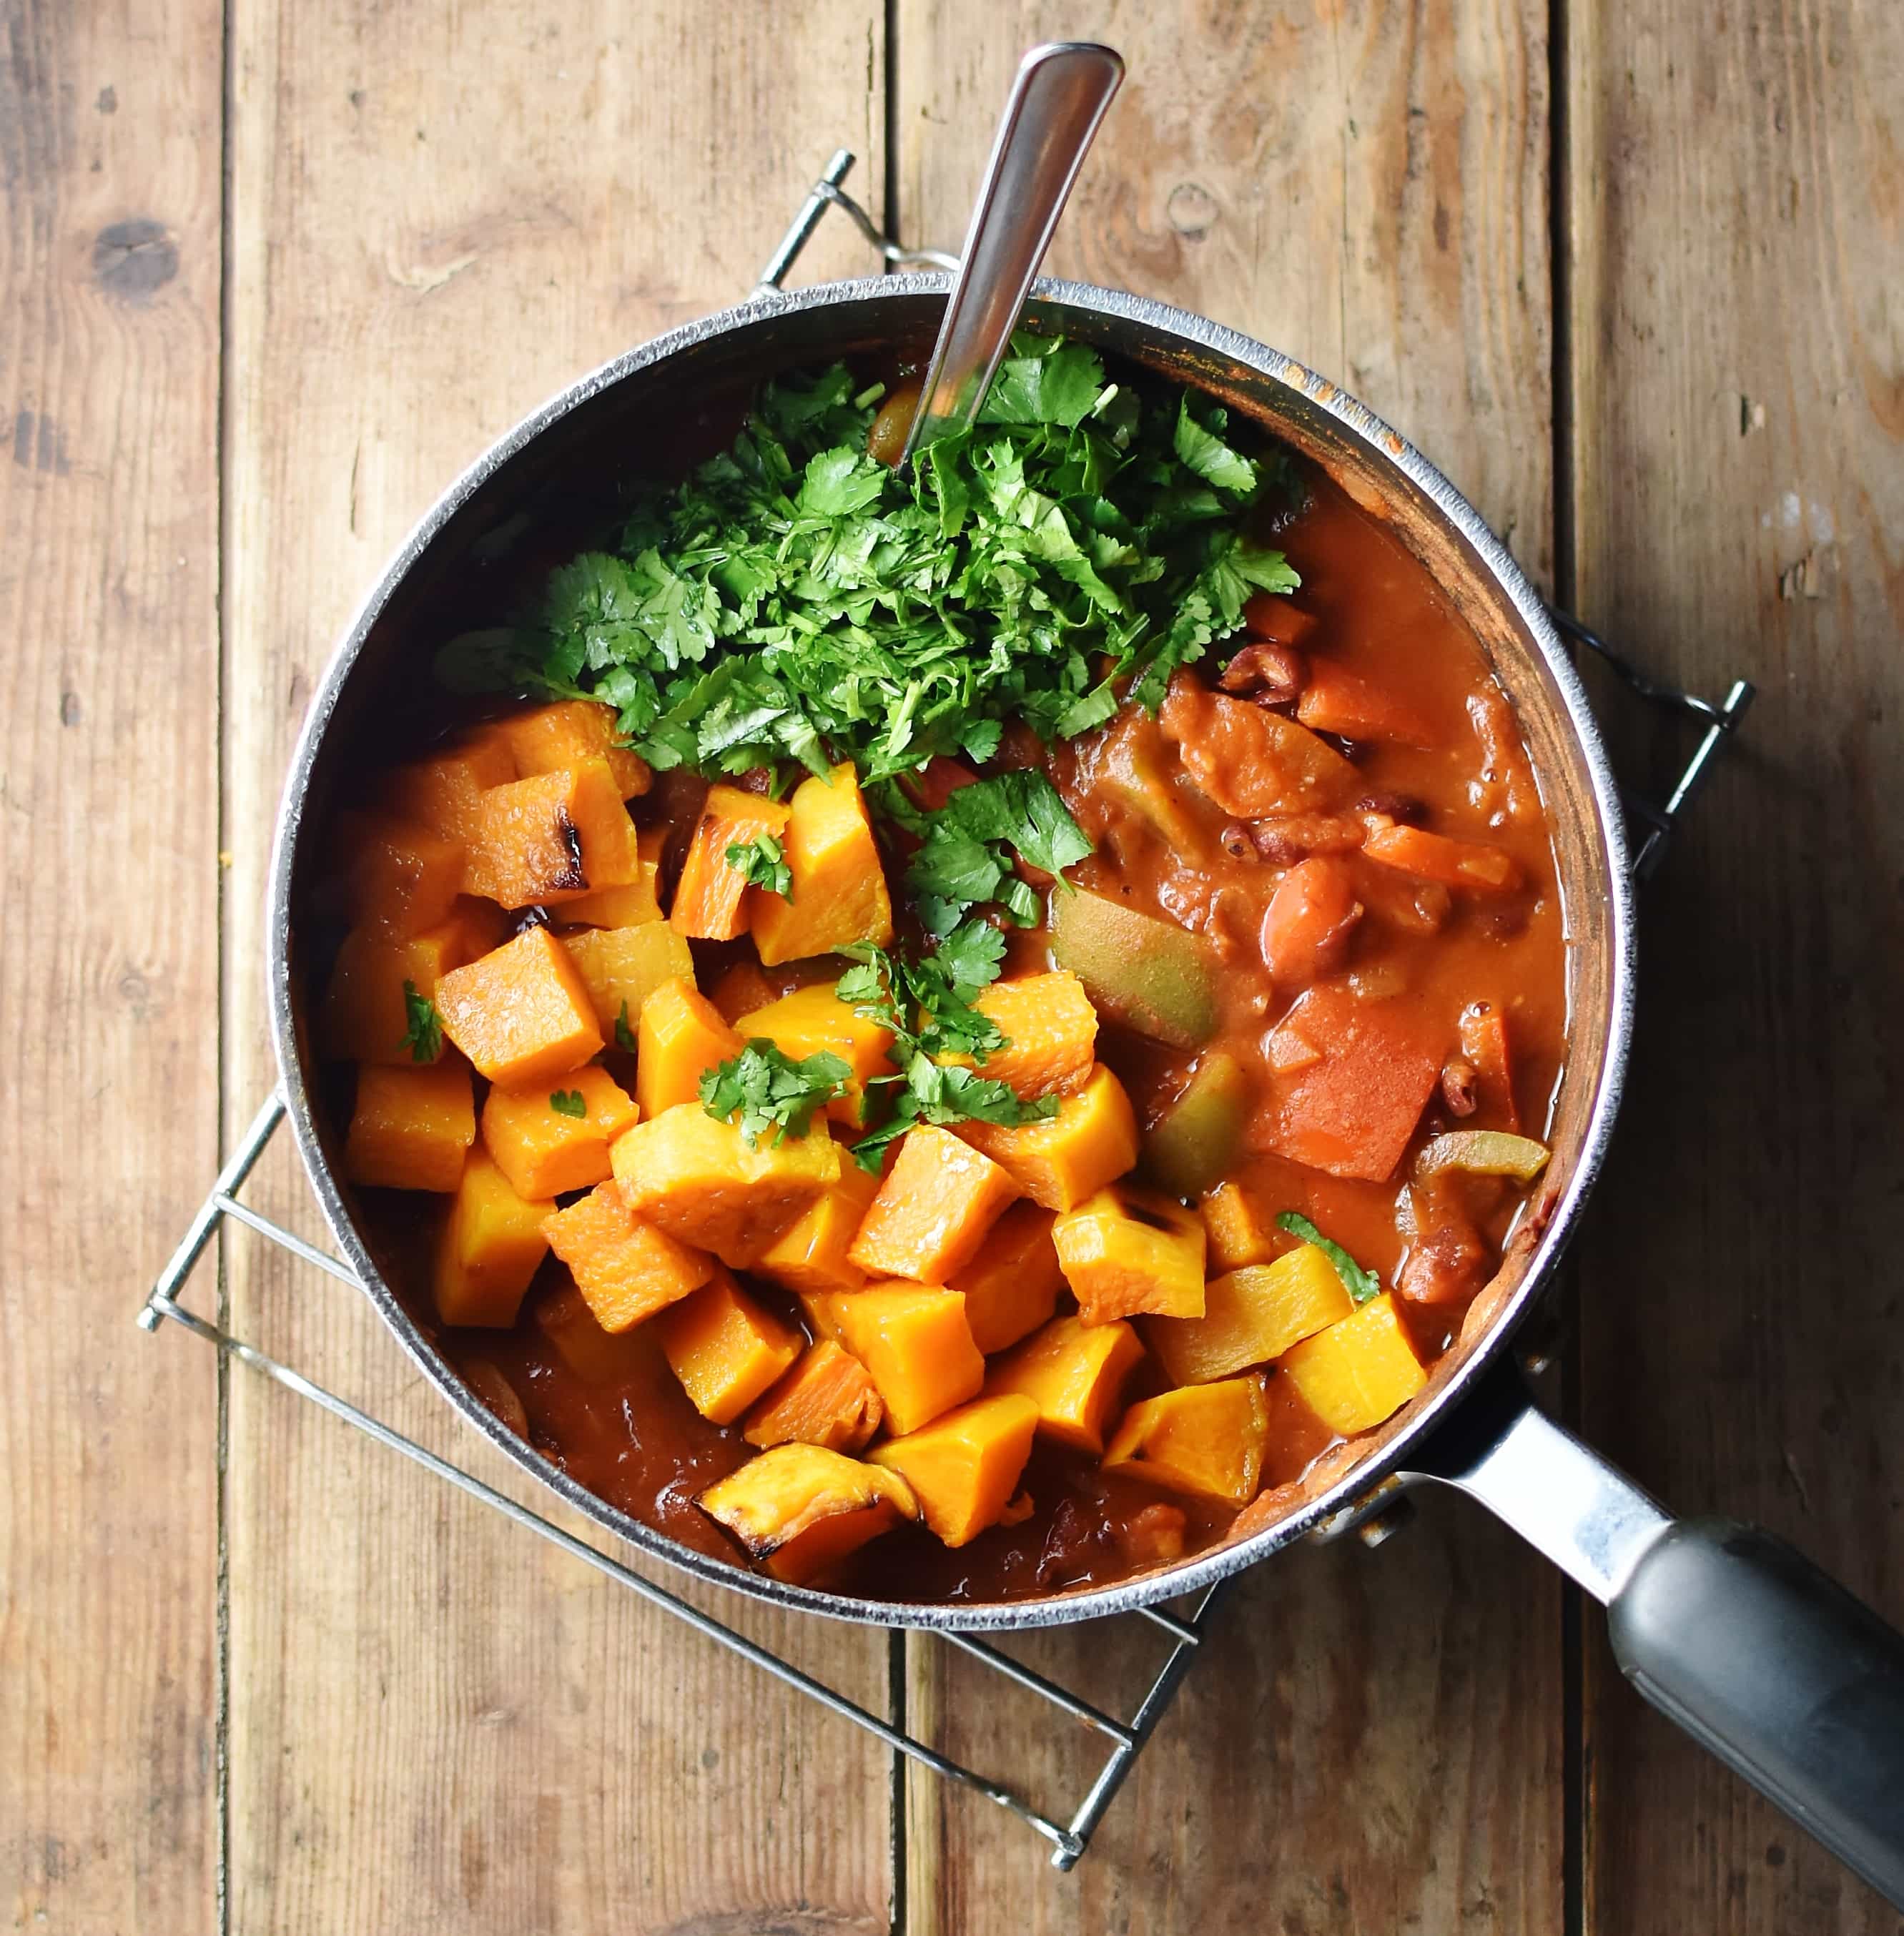 Cubed squash, herbs and tomato sauce in large pot with spoon.